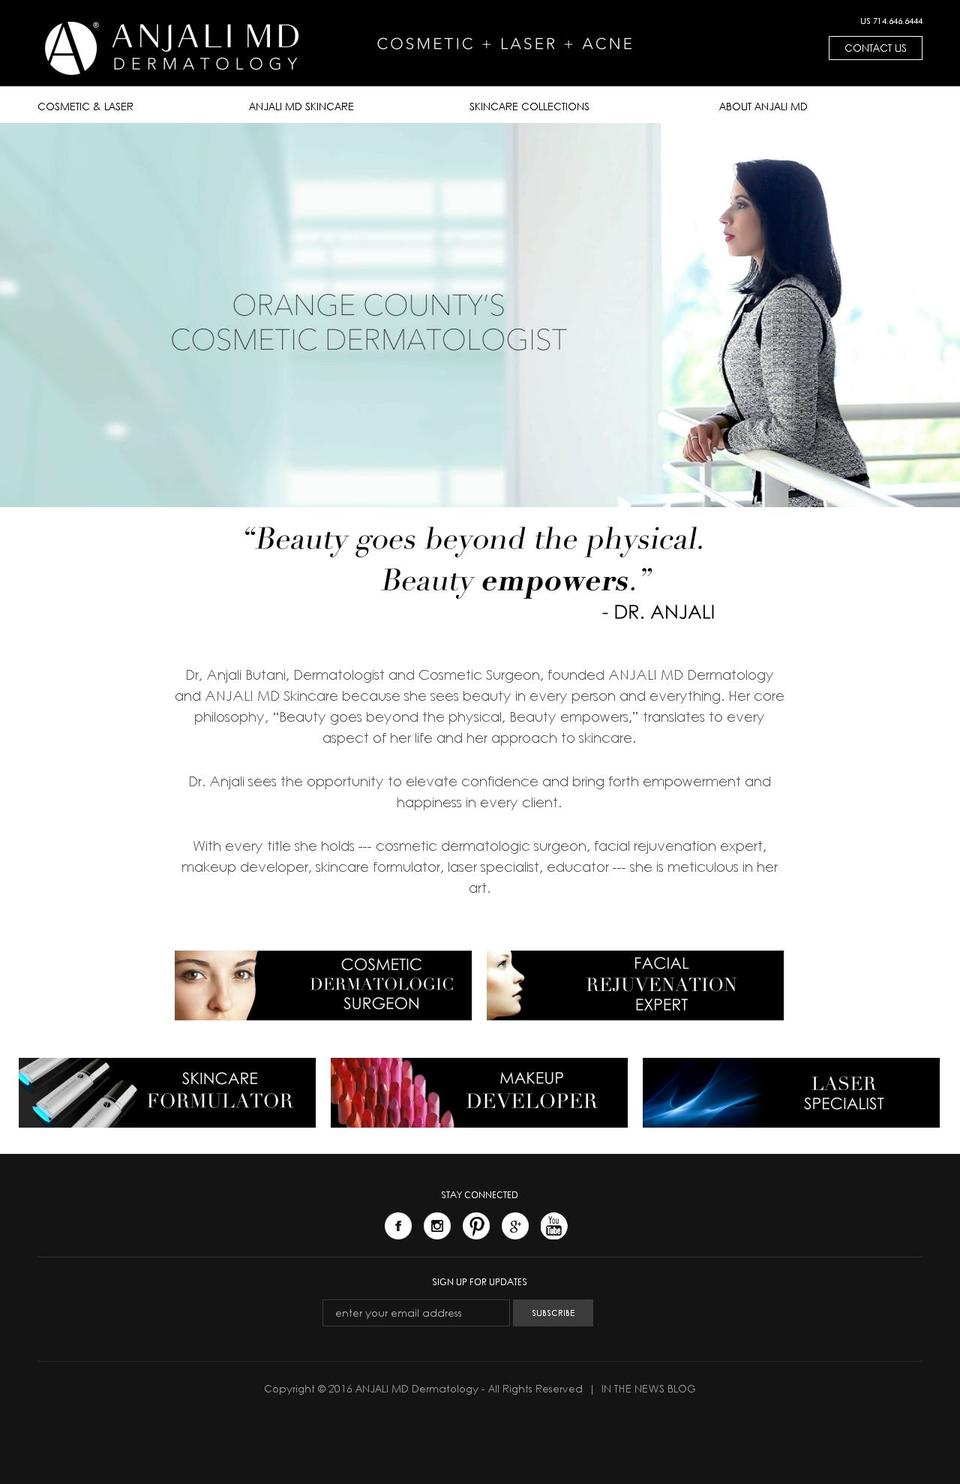 Anjali MD Site 2016 Shopify theme site example oclasereyelift.net